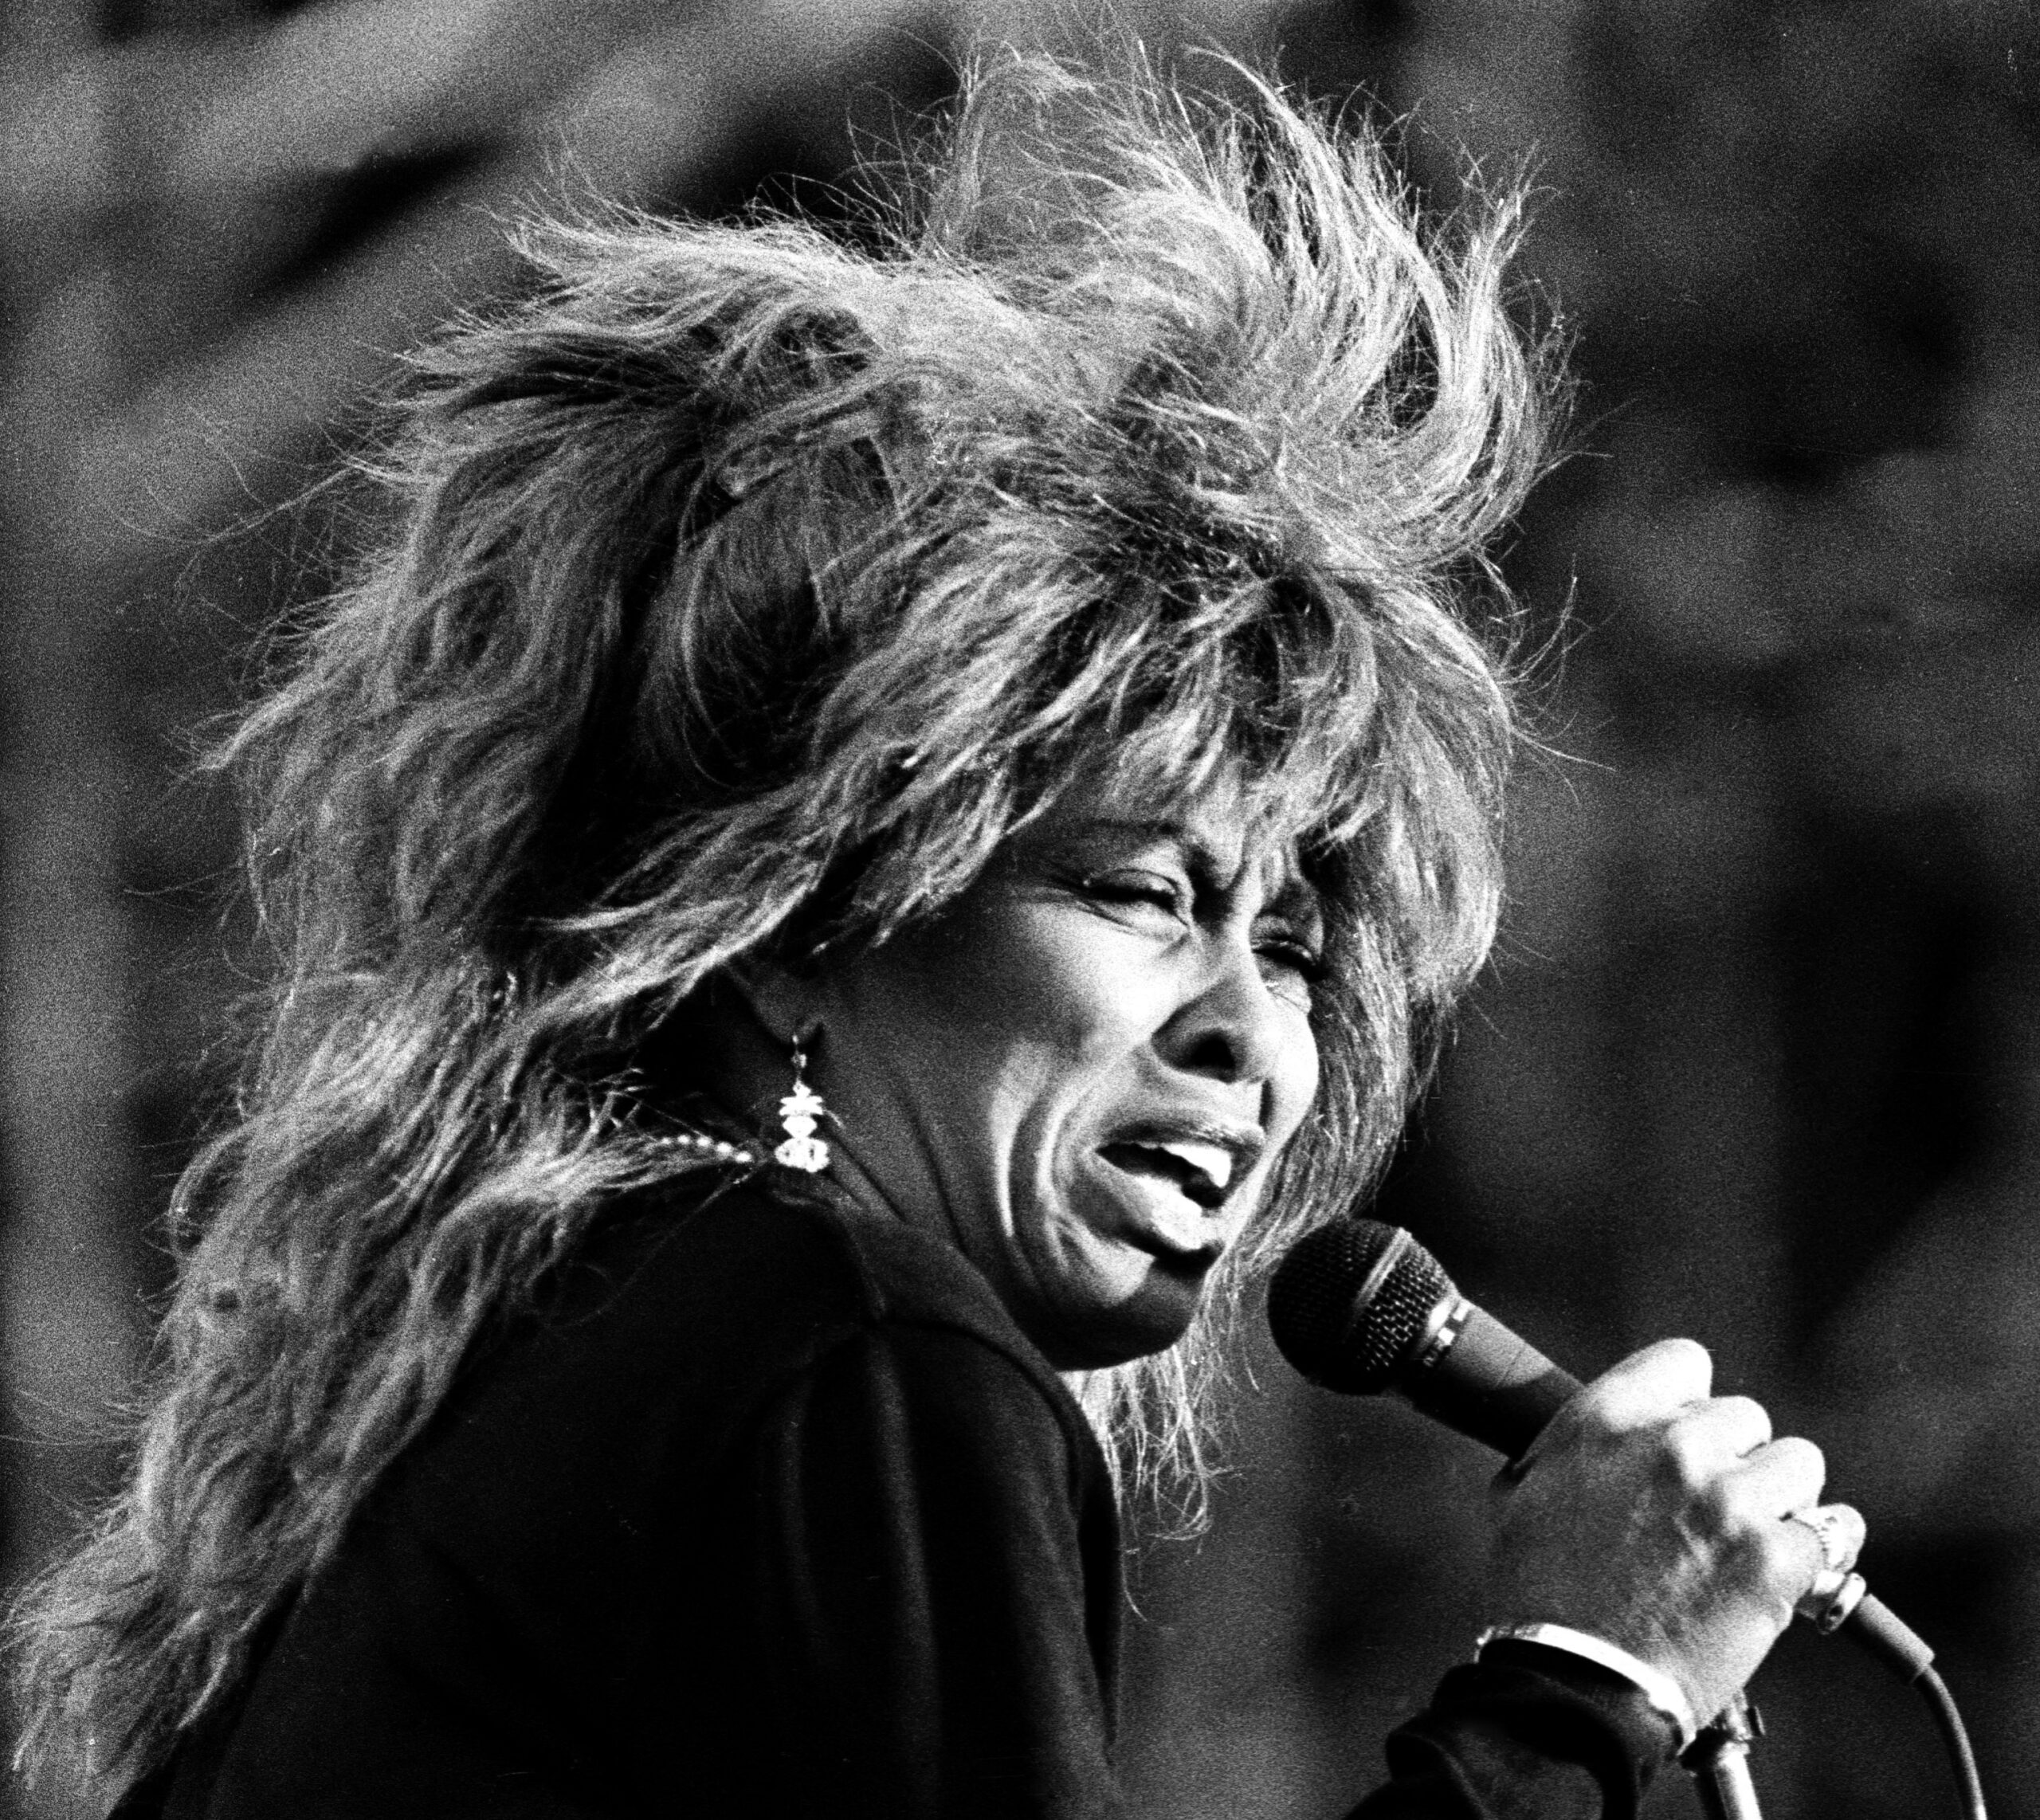 Tina Turner dies peacefully in her home near Zurich, Switzerland on May 24, 2023, at the age of 83.